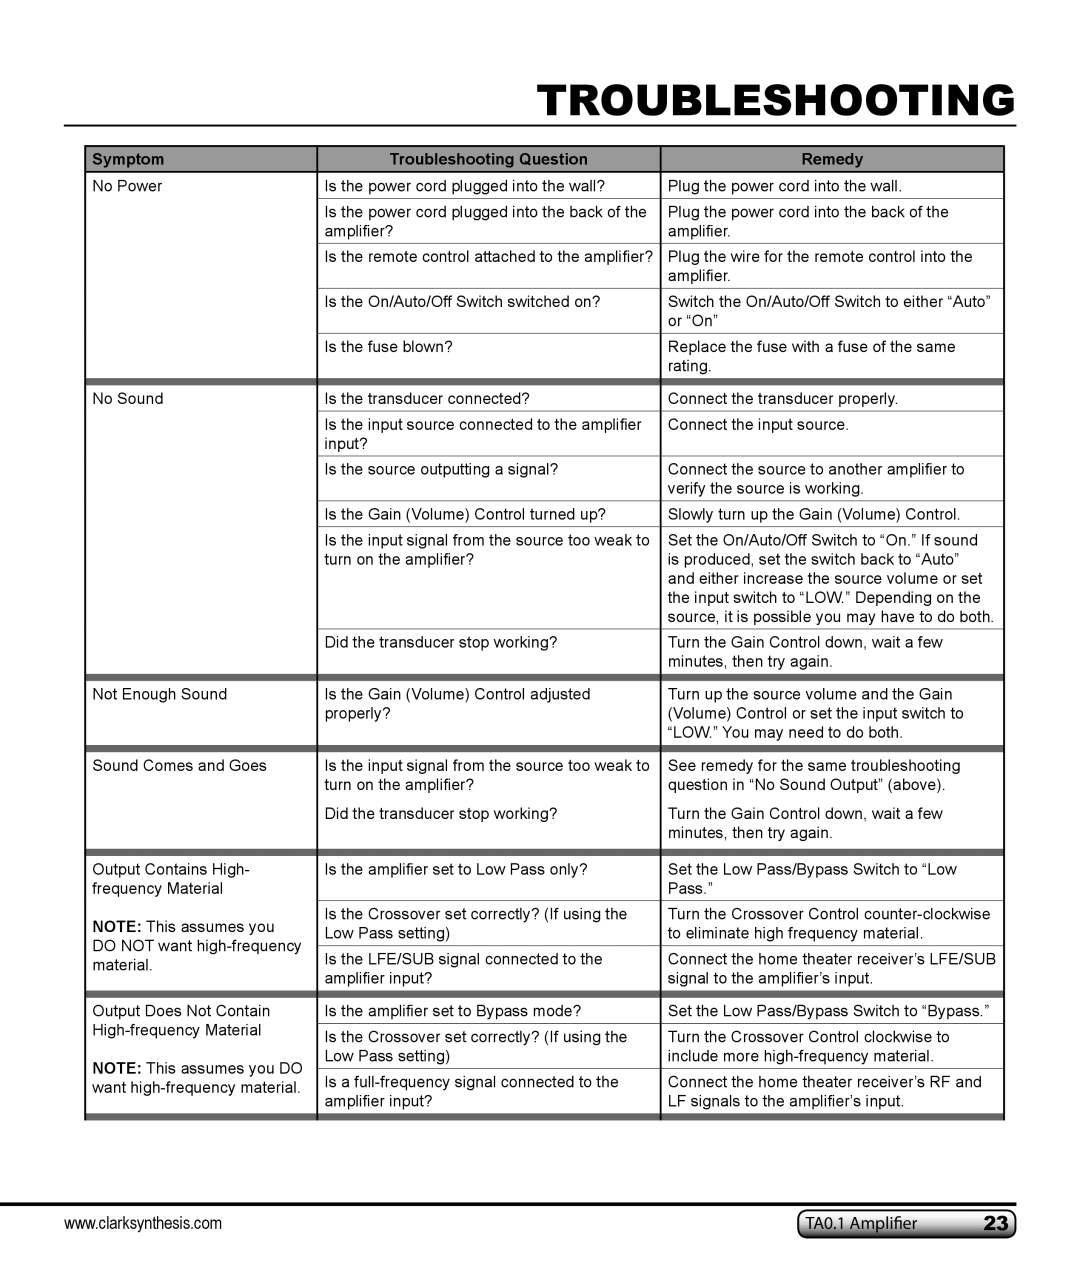 Clark Synthesis TA0.1 owner manual Symptom, Troubleshooting Question, Remedy 